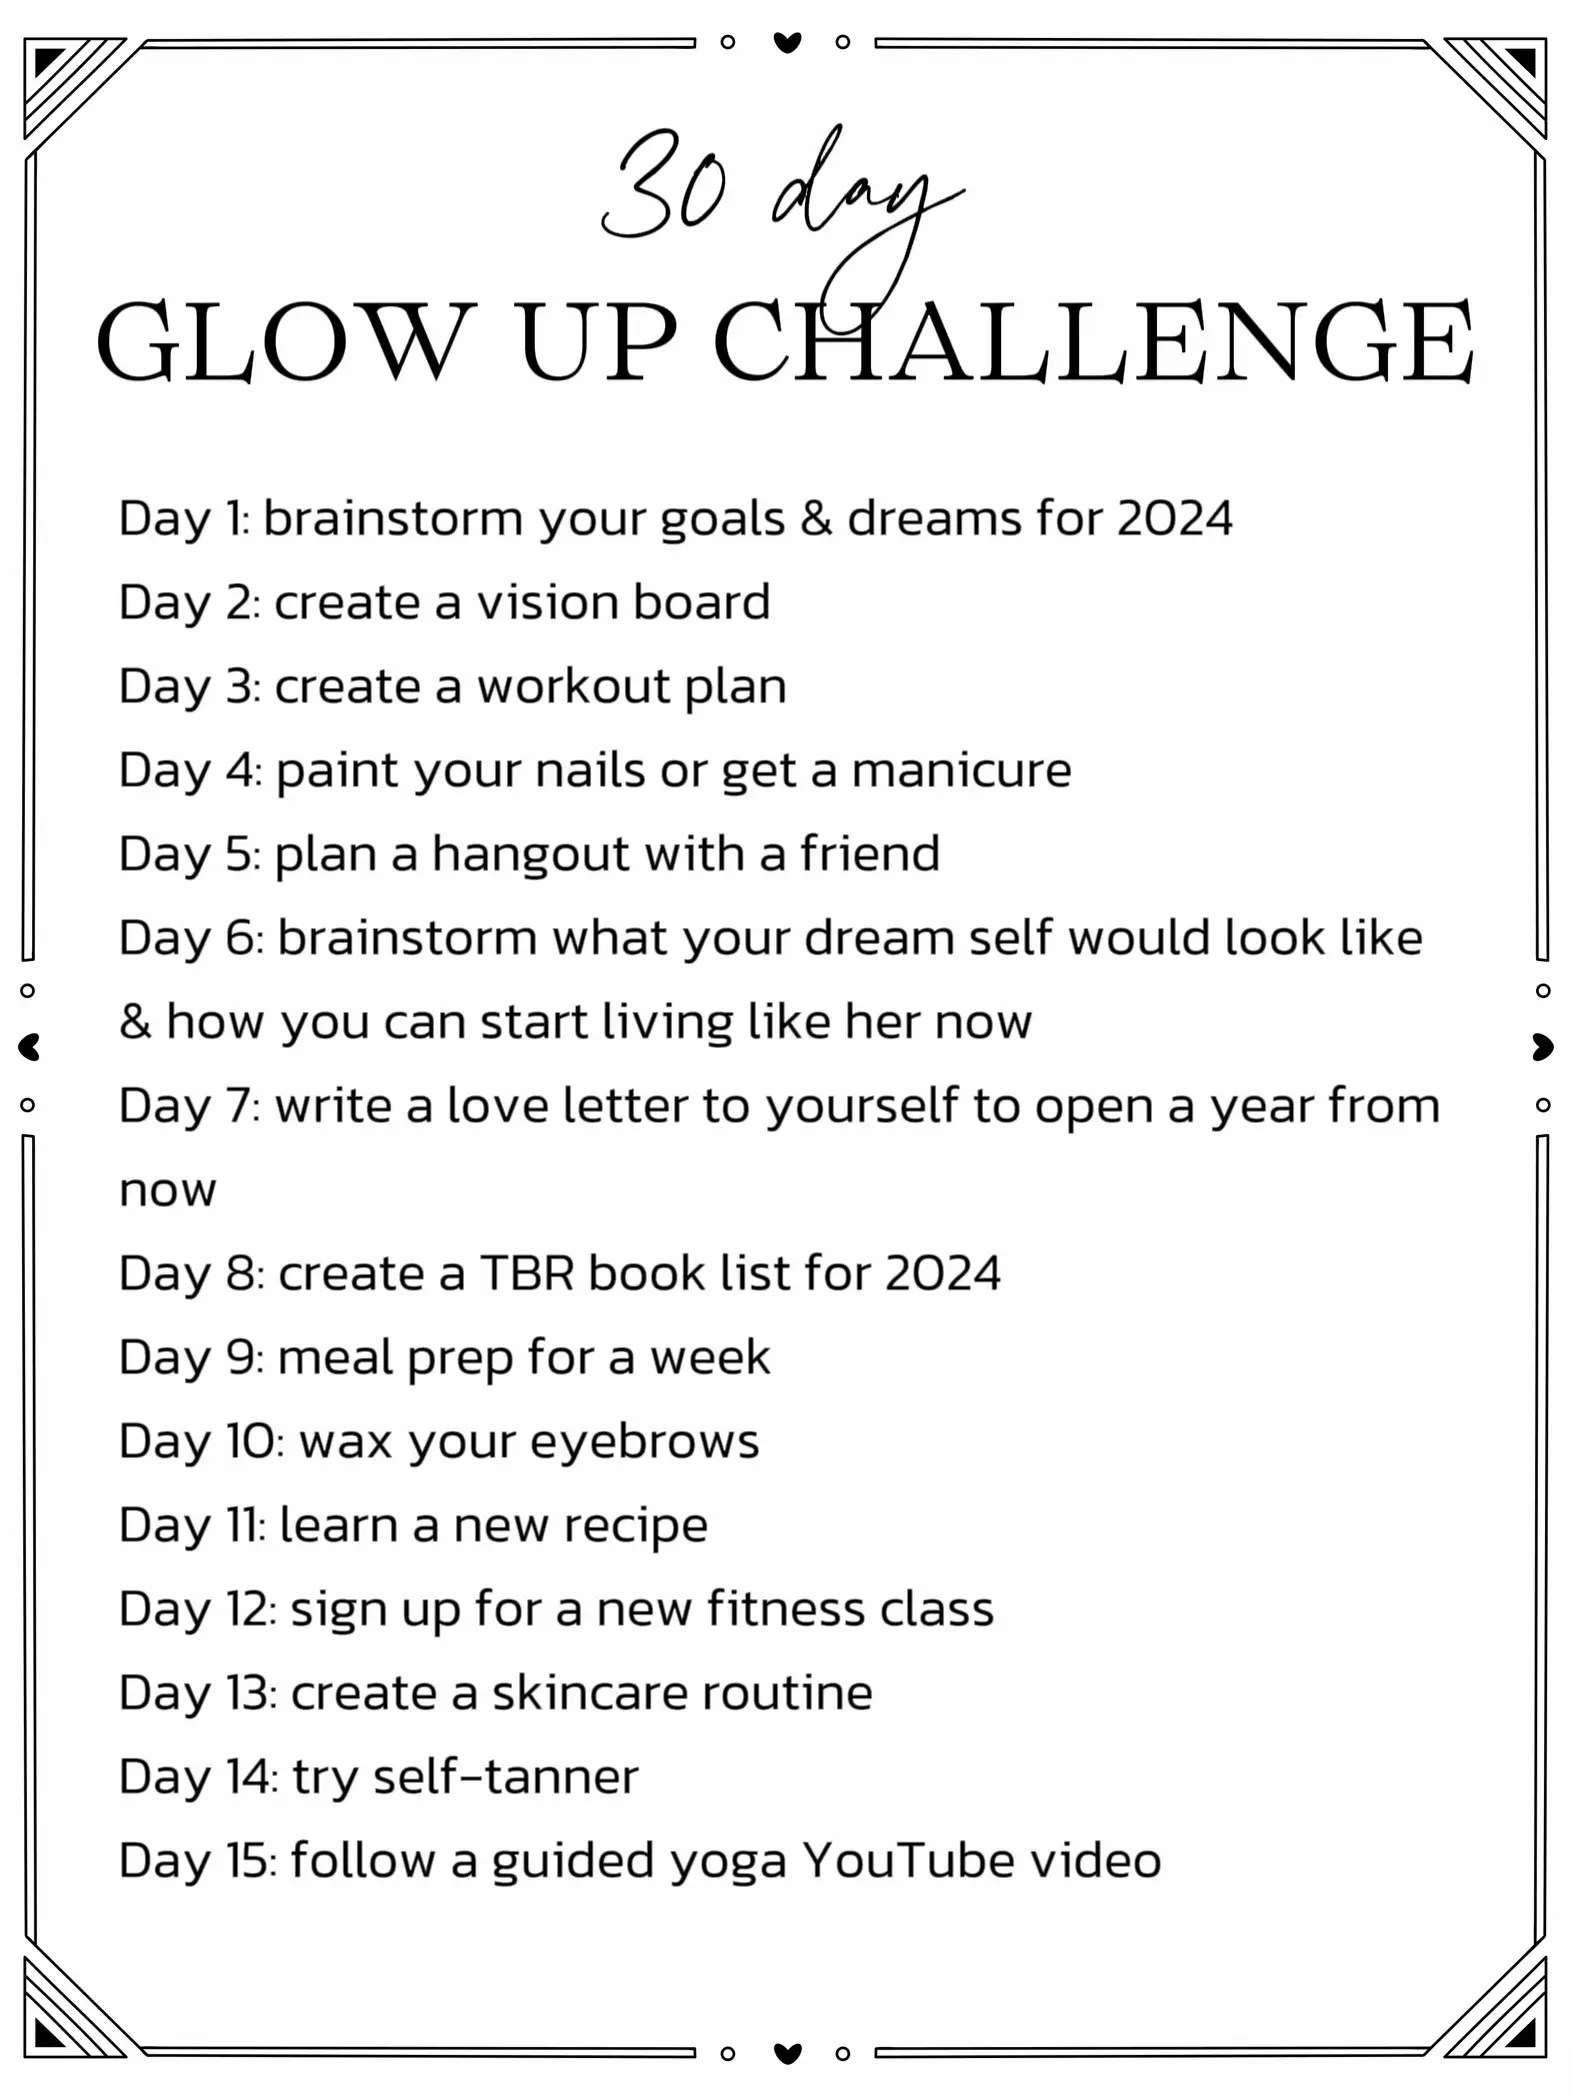 2024 GLOW UP CHALLENGE (30 DAYS)  Gallery posted by Rebekah Joy